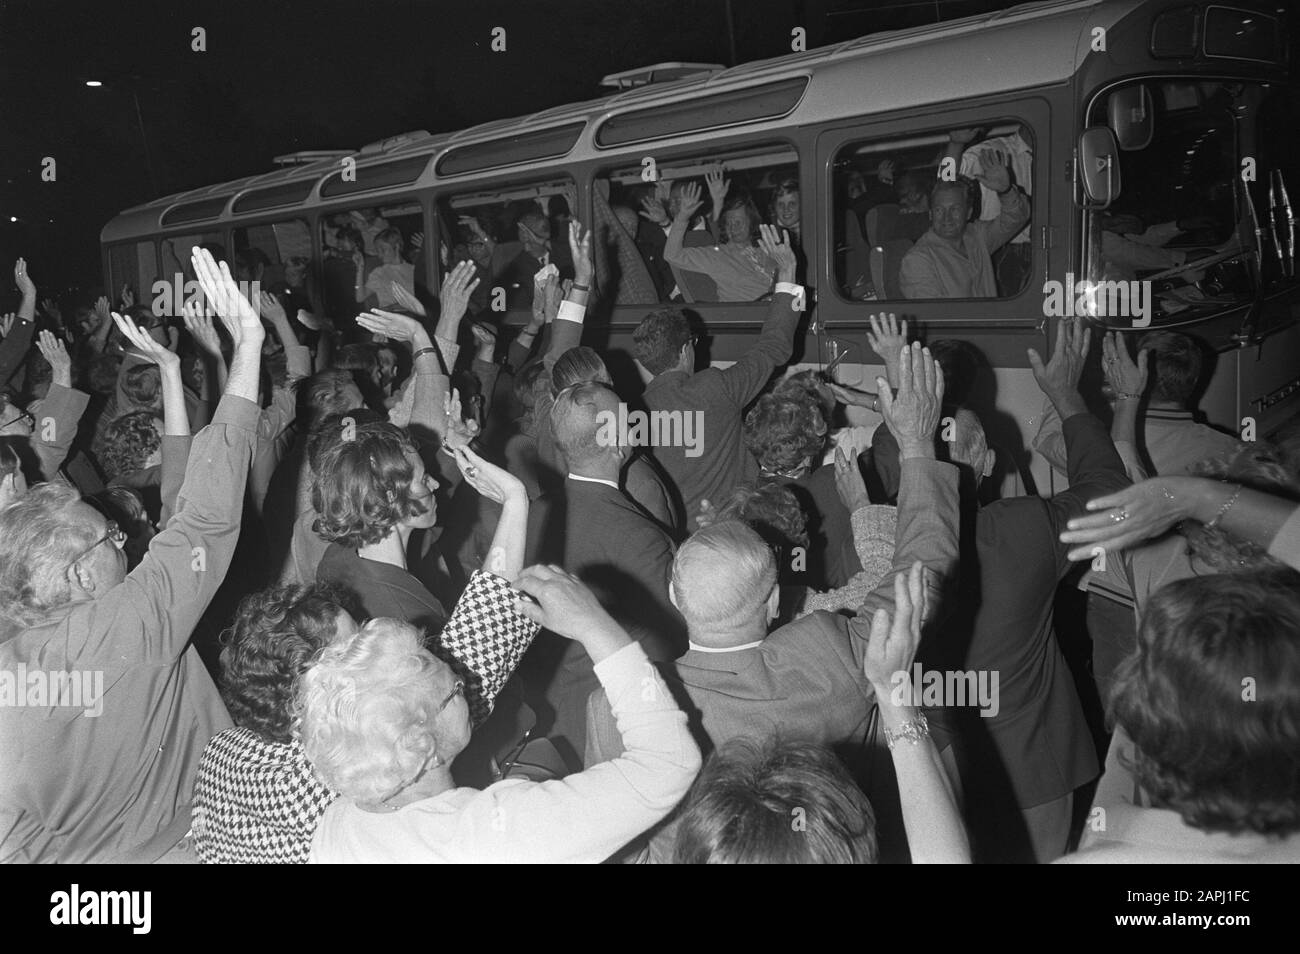 Czech holidaymakers return to their homeland Description: The Czechs leave by bus from Stadionplein, carved out by acquaintances Date: 28 August 1968 Location: Amsterdam, Noord-Holland Keywords: Czechs, Czechoslovaks, departure Stock Photo